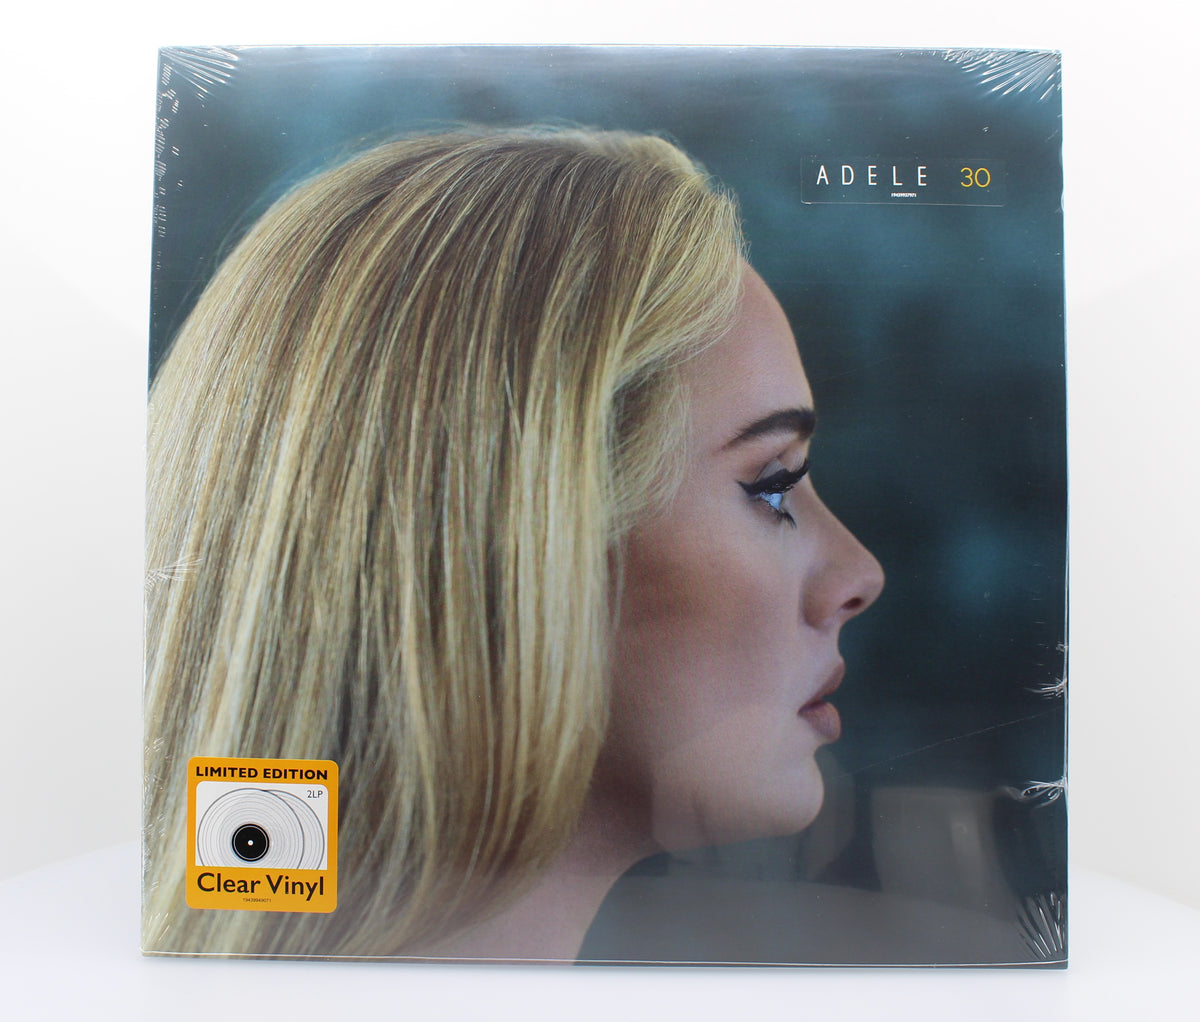 Adele 30, 2 x Vinyl, LP, Album, Limited Edition, Stereo, Clear, Pallas Pressing, Europe 2021